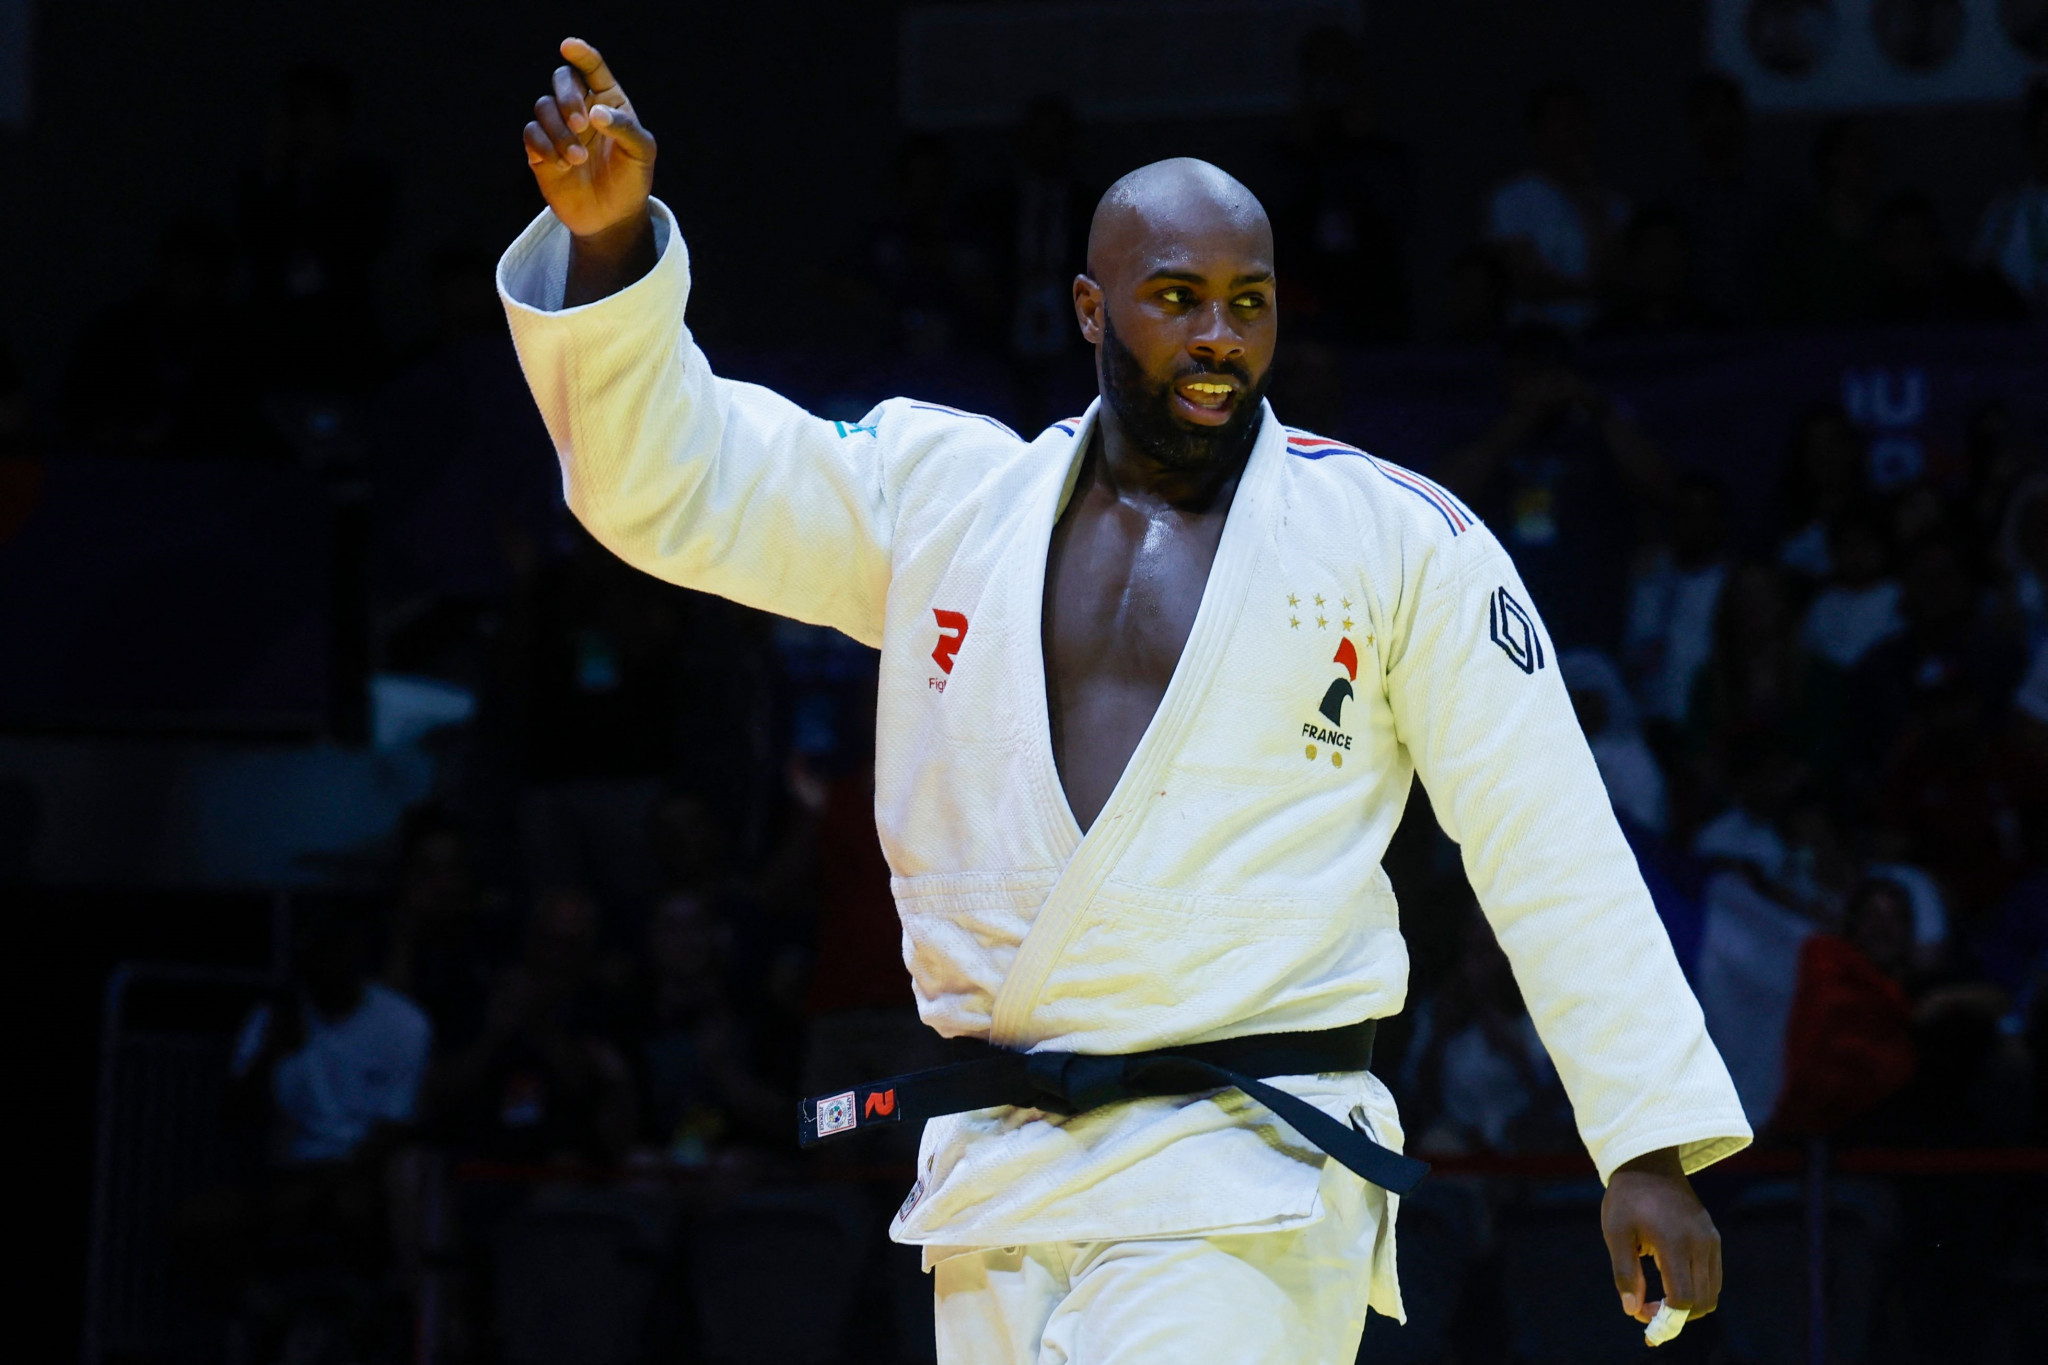 Judo sessions where Teddy Riner is due to compete sold out during the second phase of ticket sales for the Paris 2024 Olympics ©Getty Images